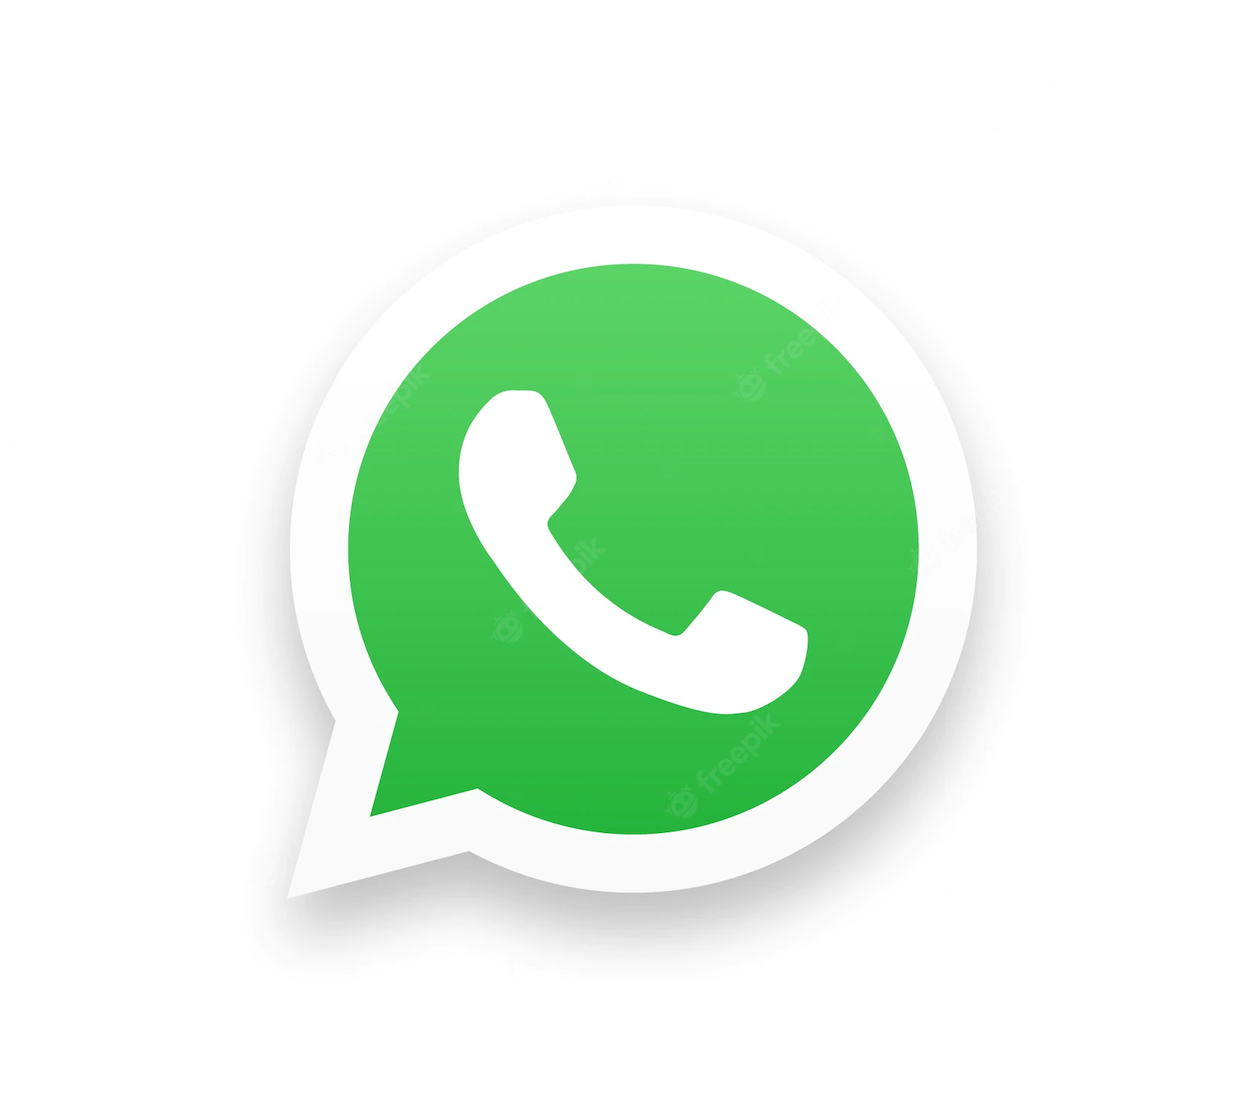 WhatsApp To Take Center Stage As Primary Marketing Channel - Haptik’s The State of WhatsApp Marketing 2023 Report